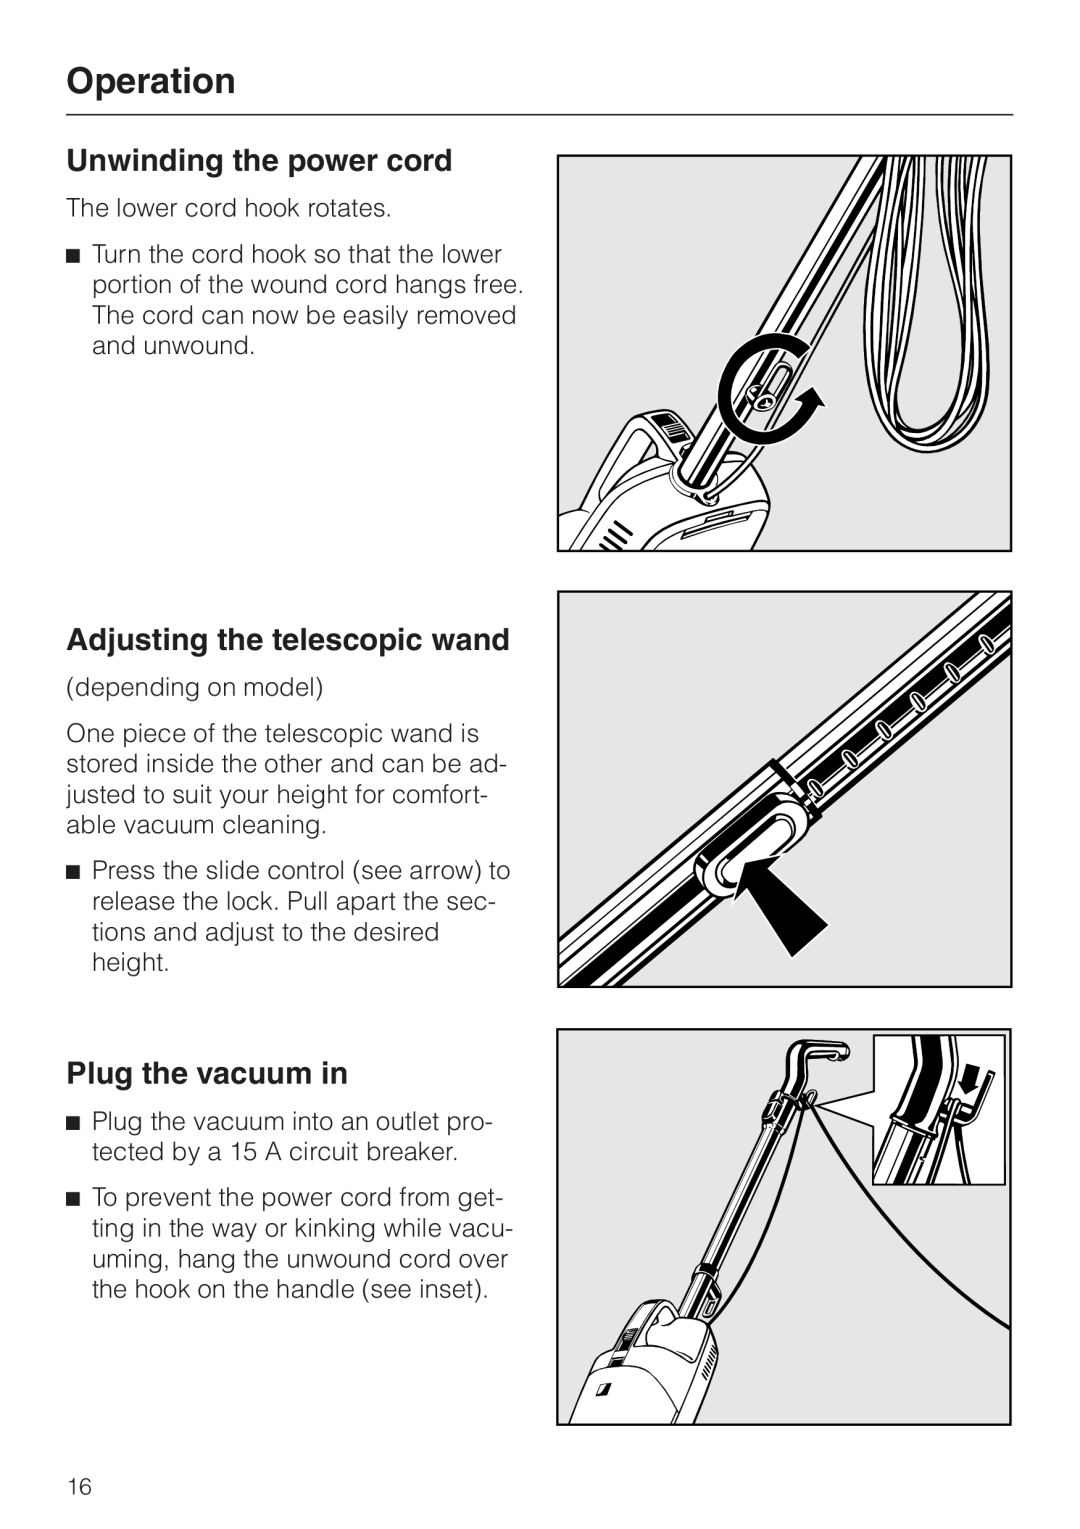 Miele S157 manual Operation, Unwinding the power cord, Adjusting the telescopic wand, Plug the vacuum in 